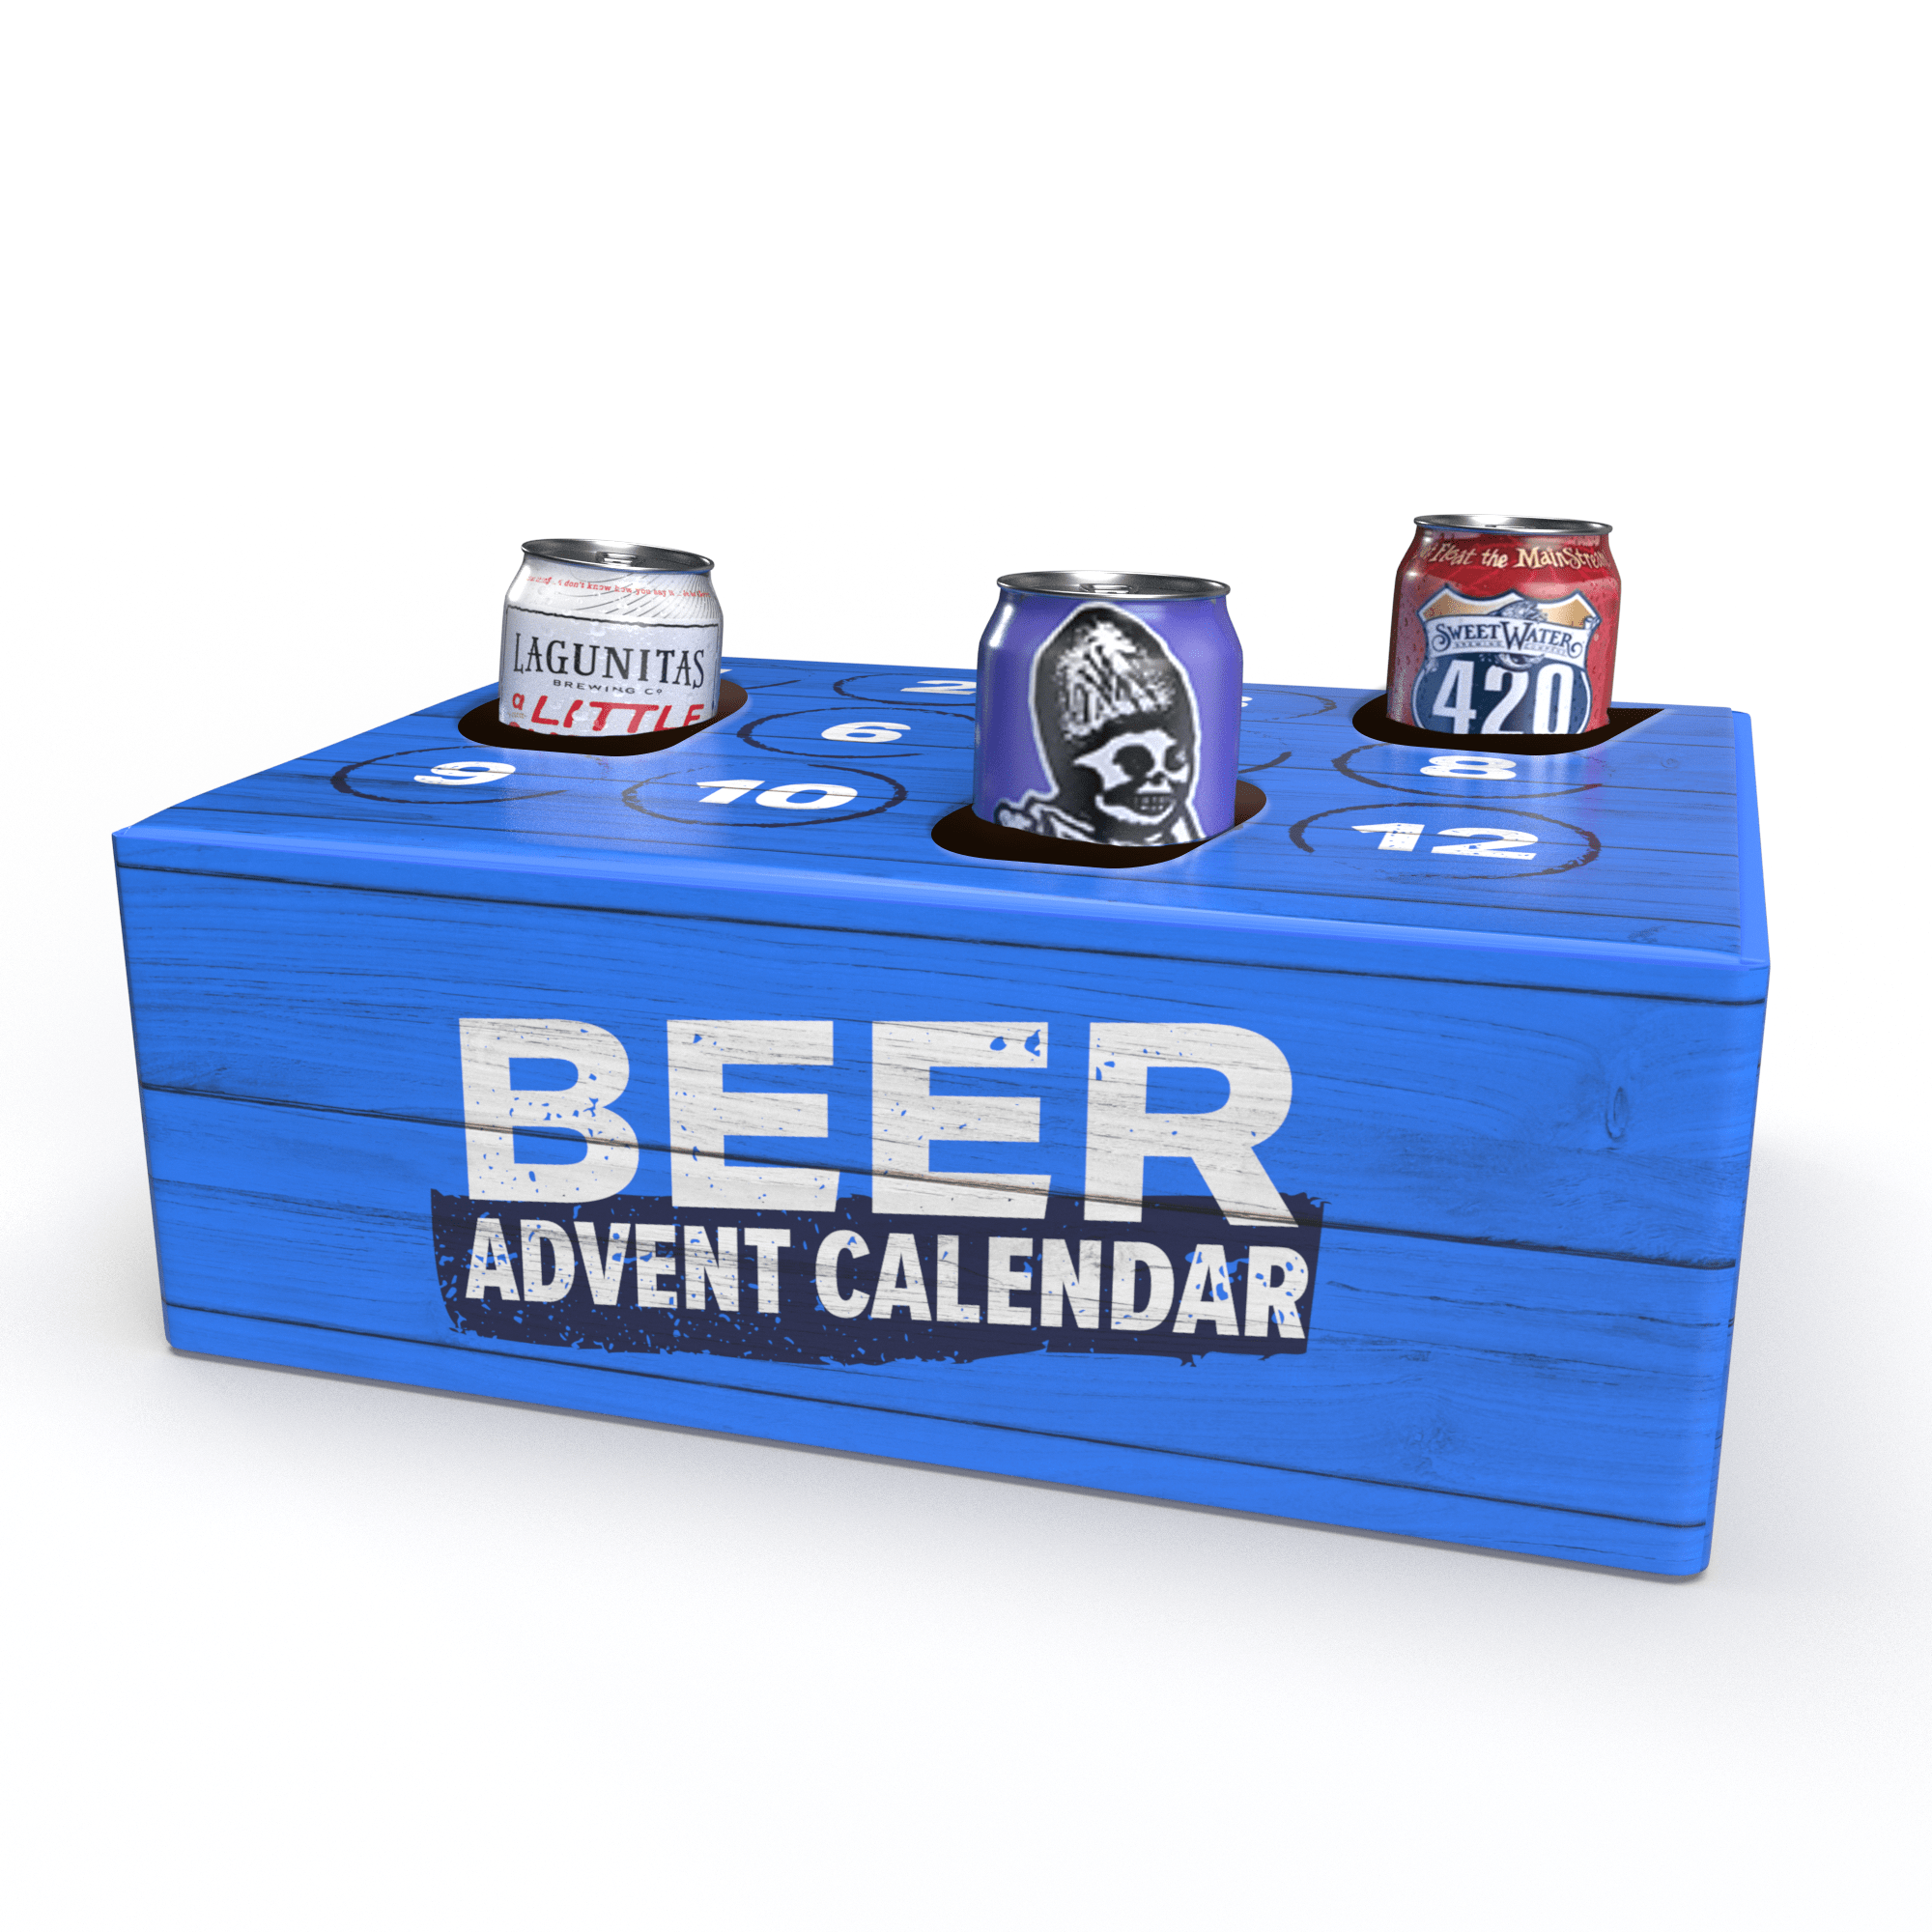 The best advent calendars for food and drink lovers